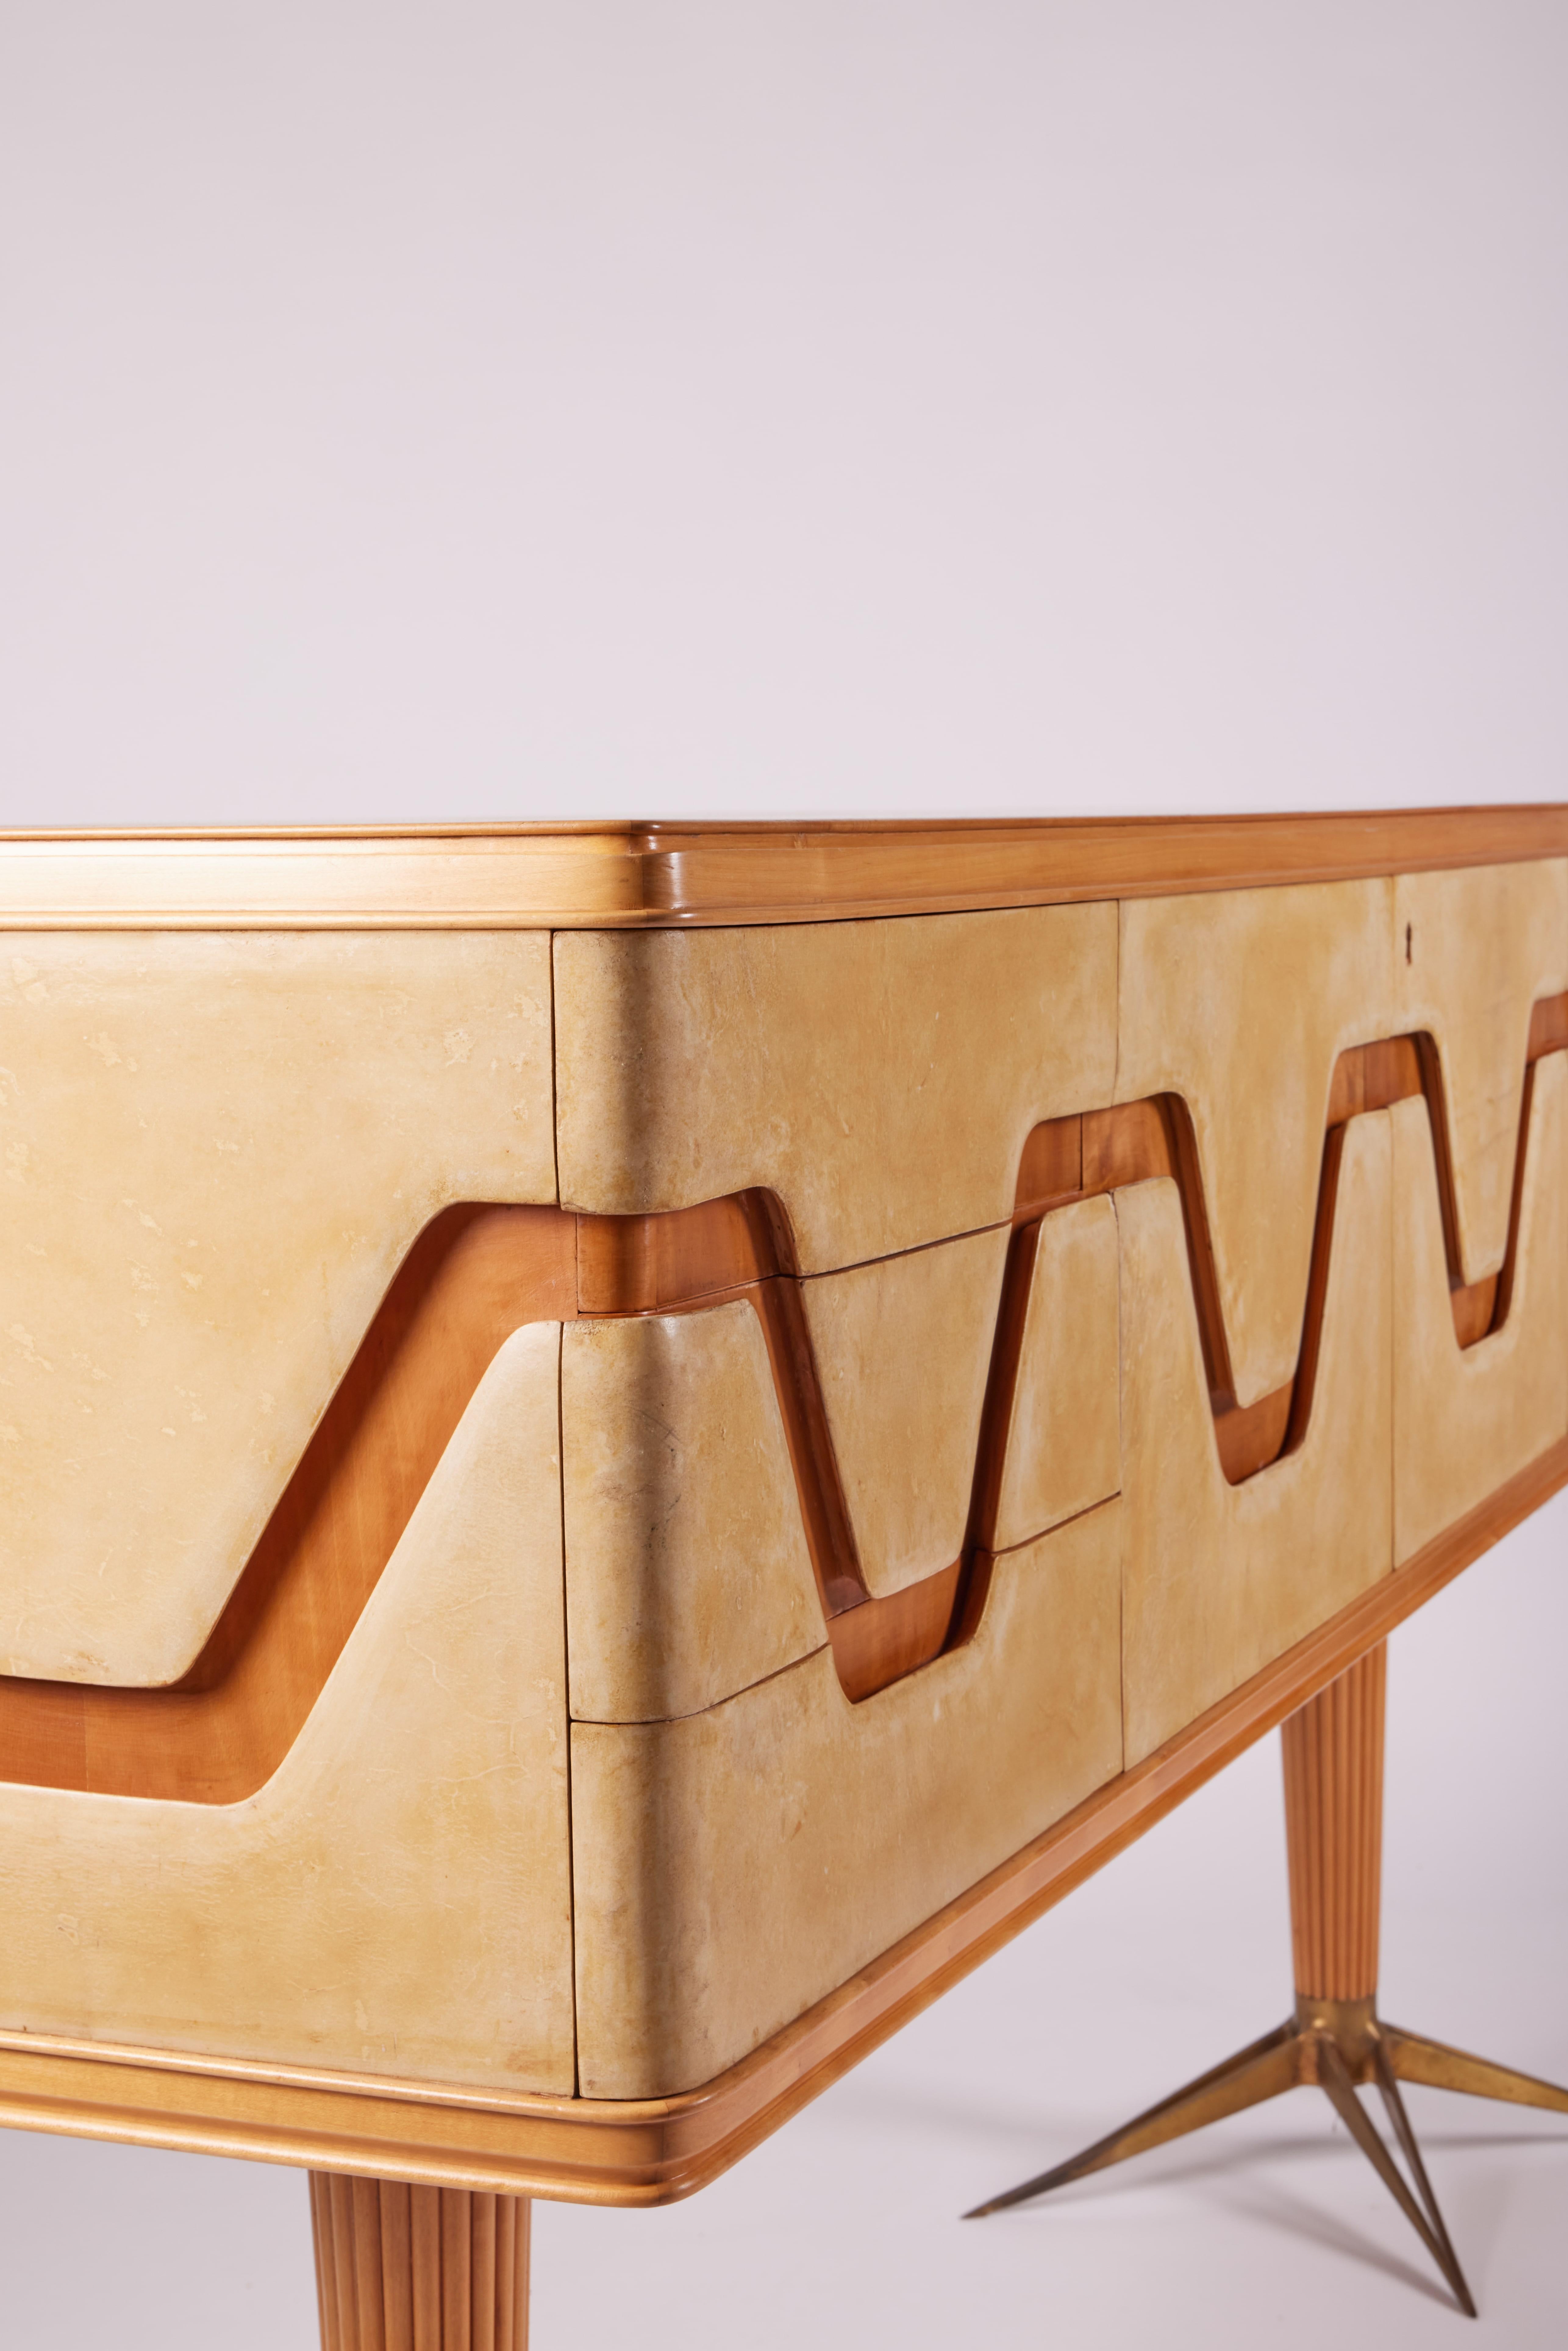 Italian Midcentury Parchment and Walnut Sideboard with Brass Legs, 1940s For Sale 5